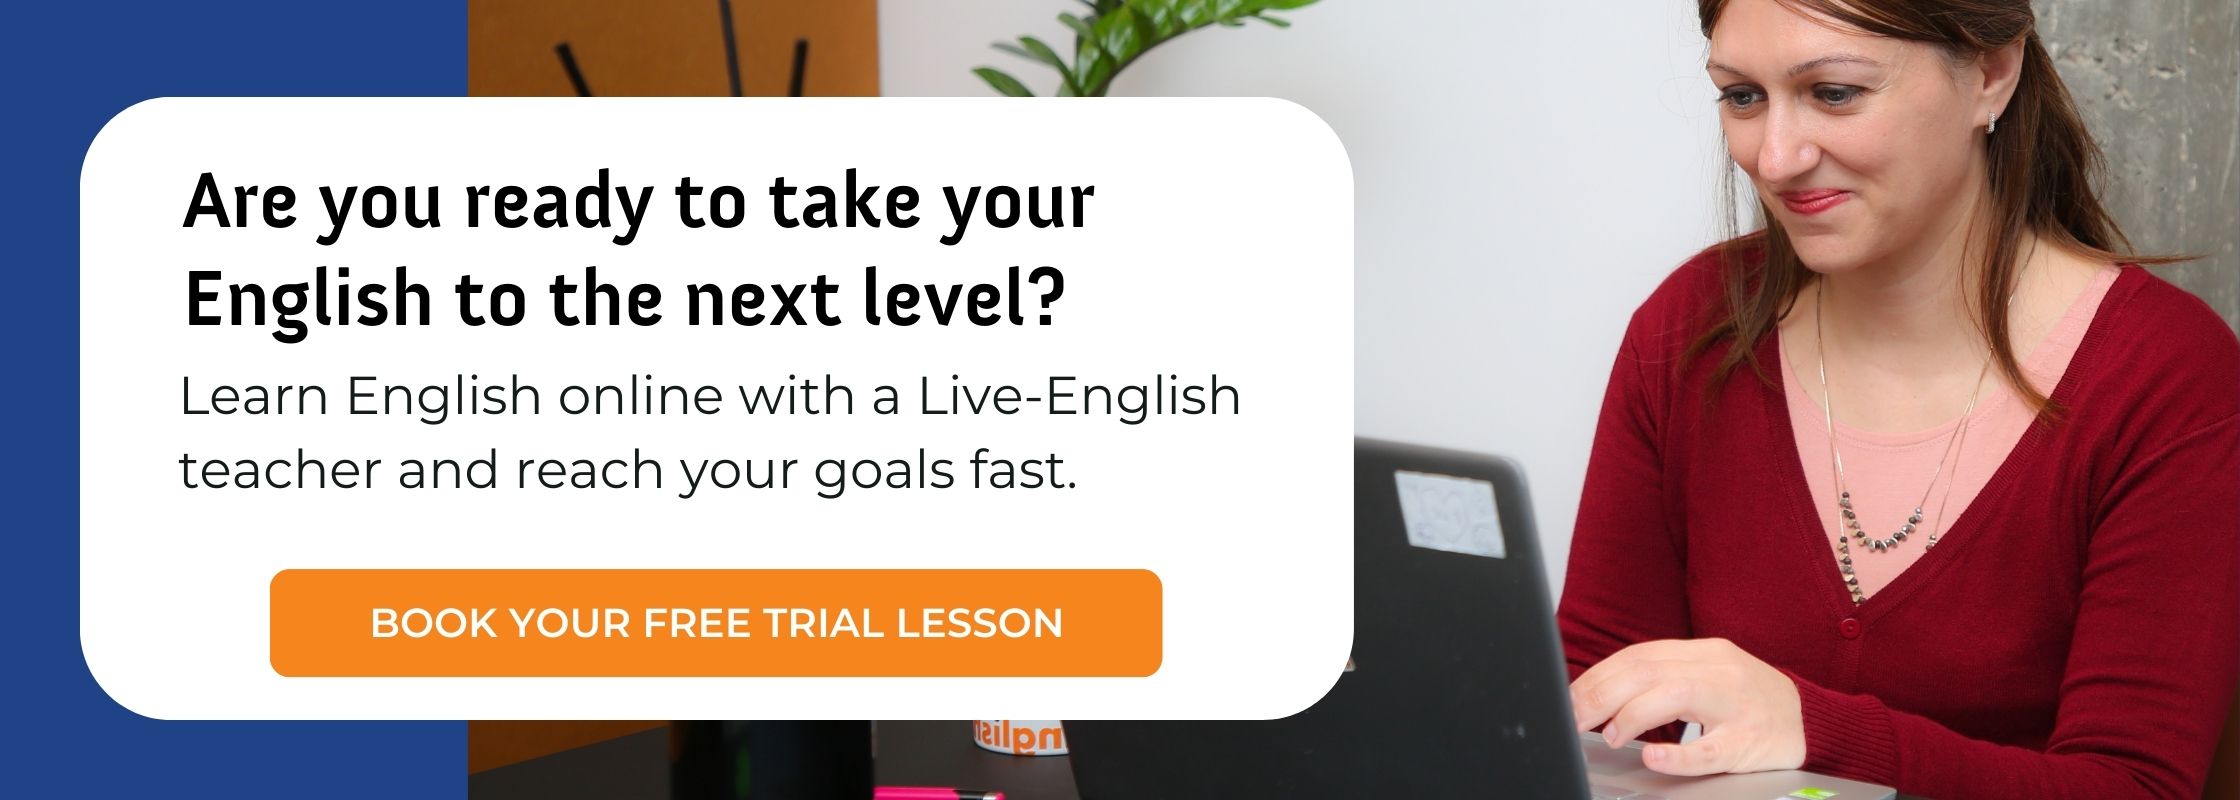 Book your free English trial lesson